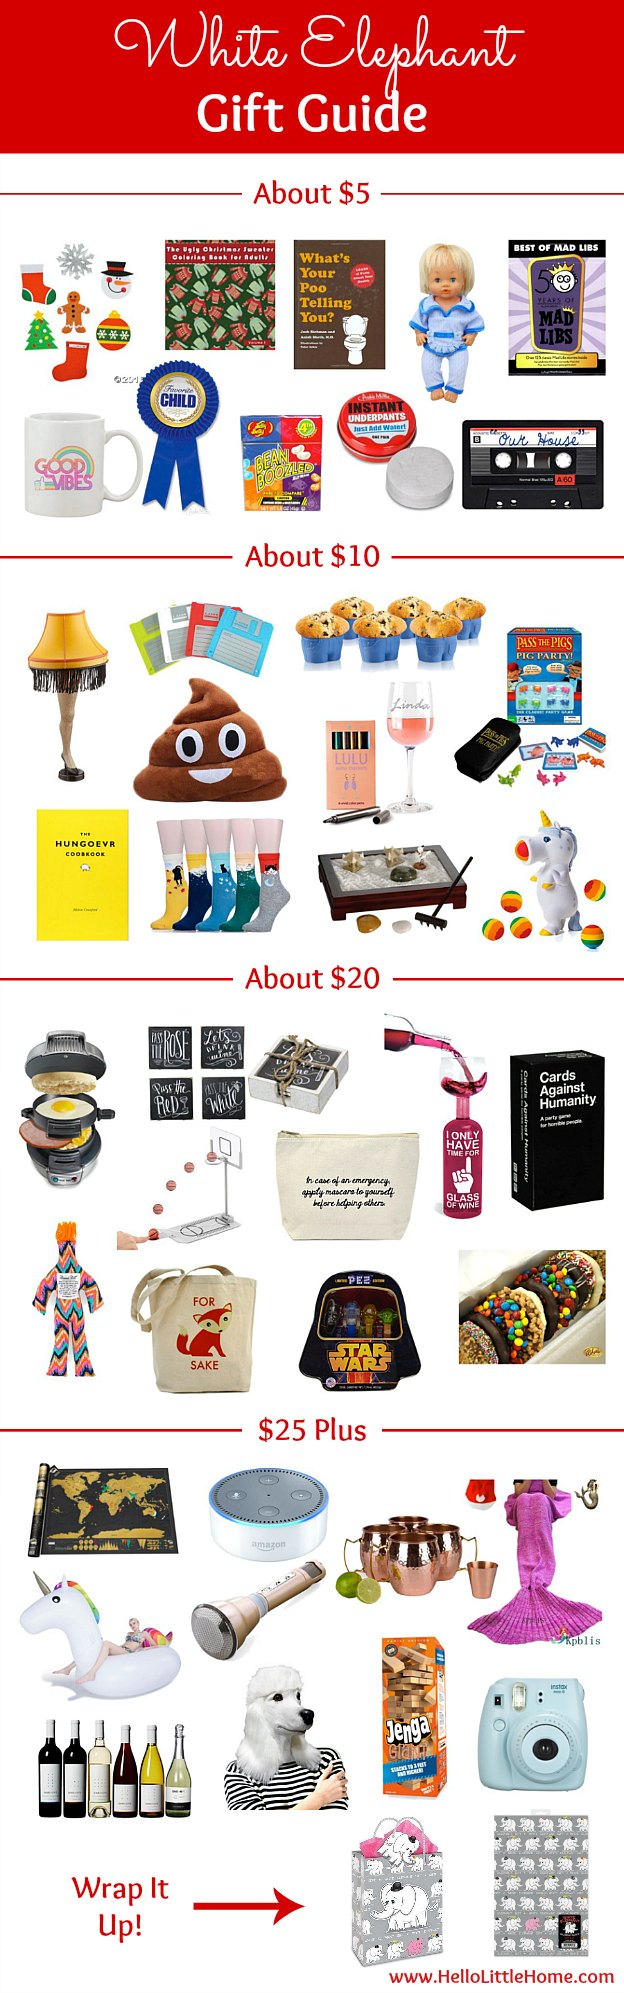 White Elephant Gift Guide ... tons of fun, creative White Elephant gift ideas for your holiday party! Find the perfect present for your White Elephant Gifts Exchange … lots of hilarious Yankee Swap gifts worth fighting for! From White Elephant Gifts people want (great for work or any Christmas party) to funny gift ideas at all price ranges from cheap gifts under $5, under $10, to $20 and more. | Hello Little Home